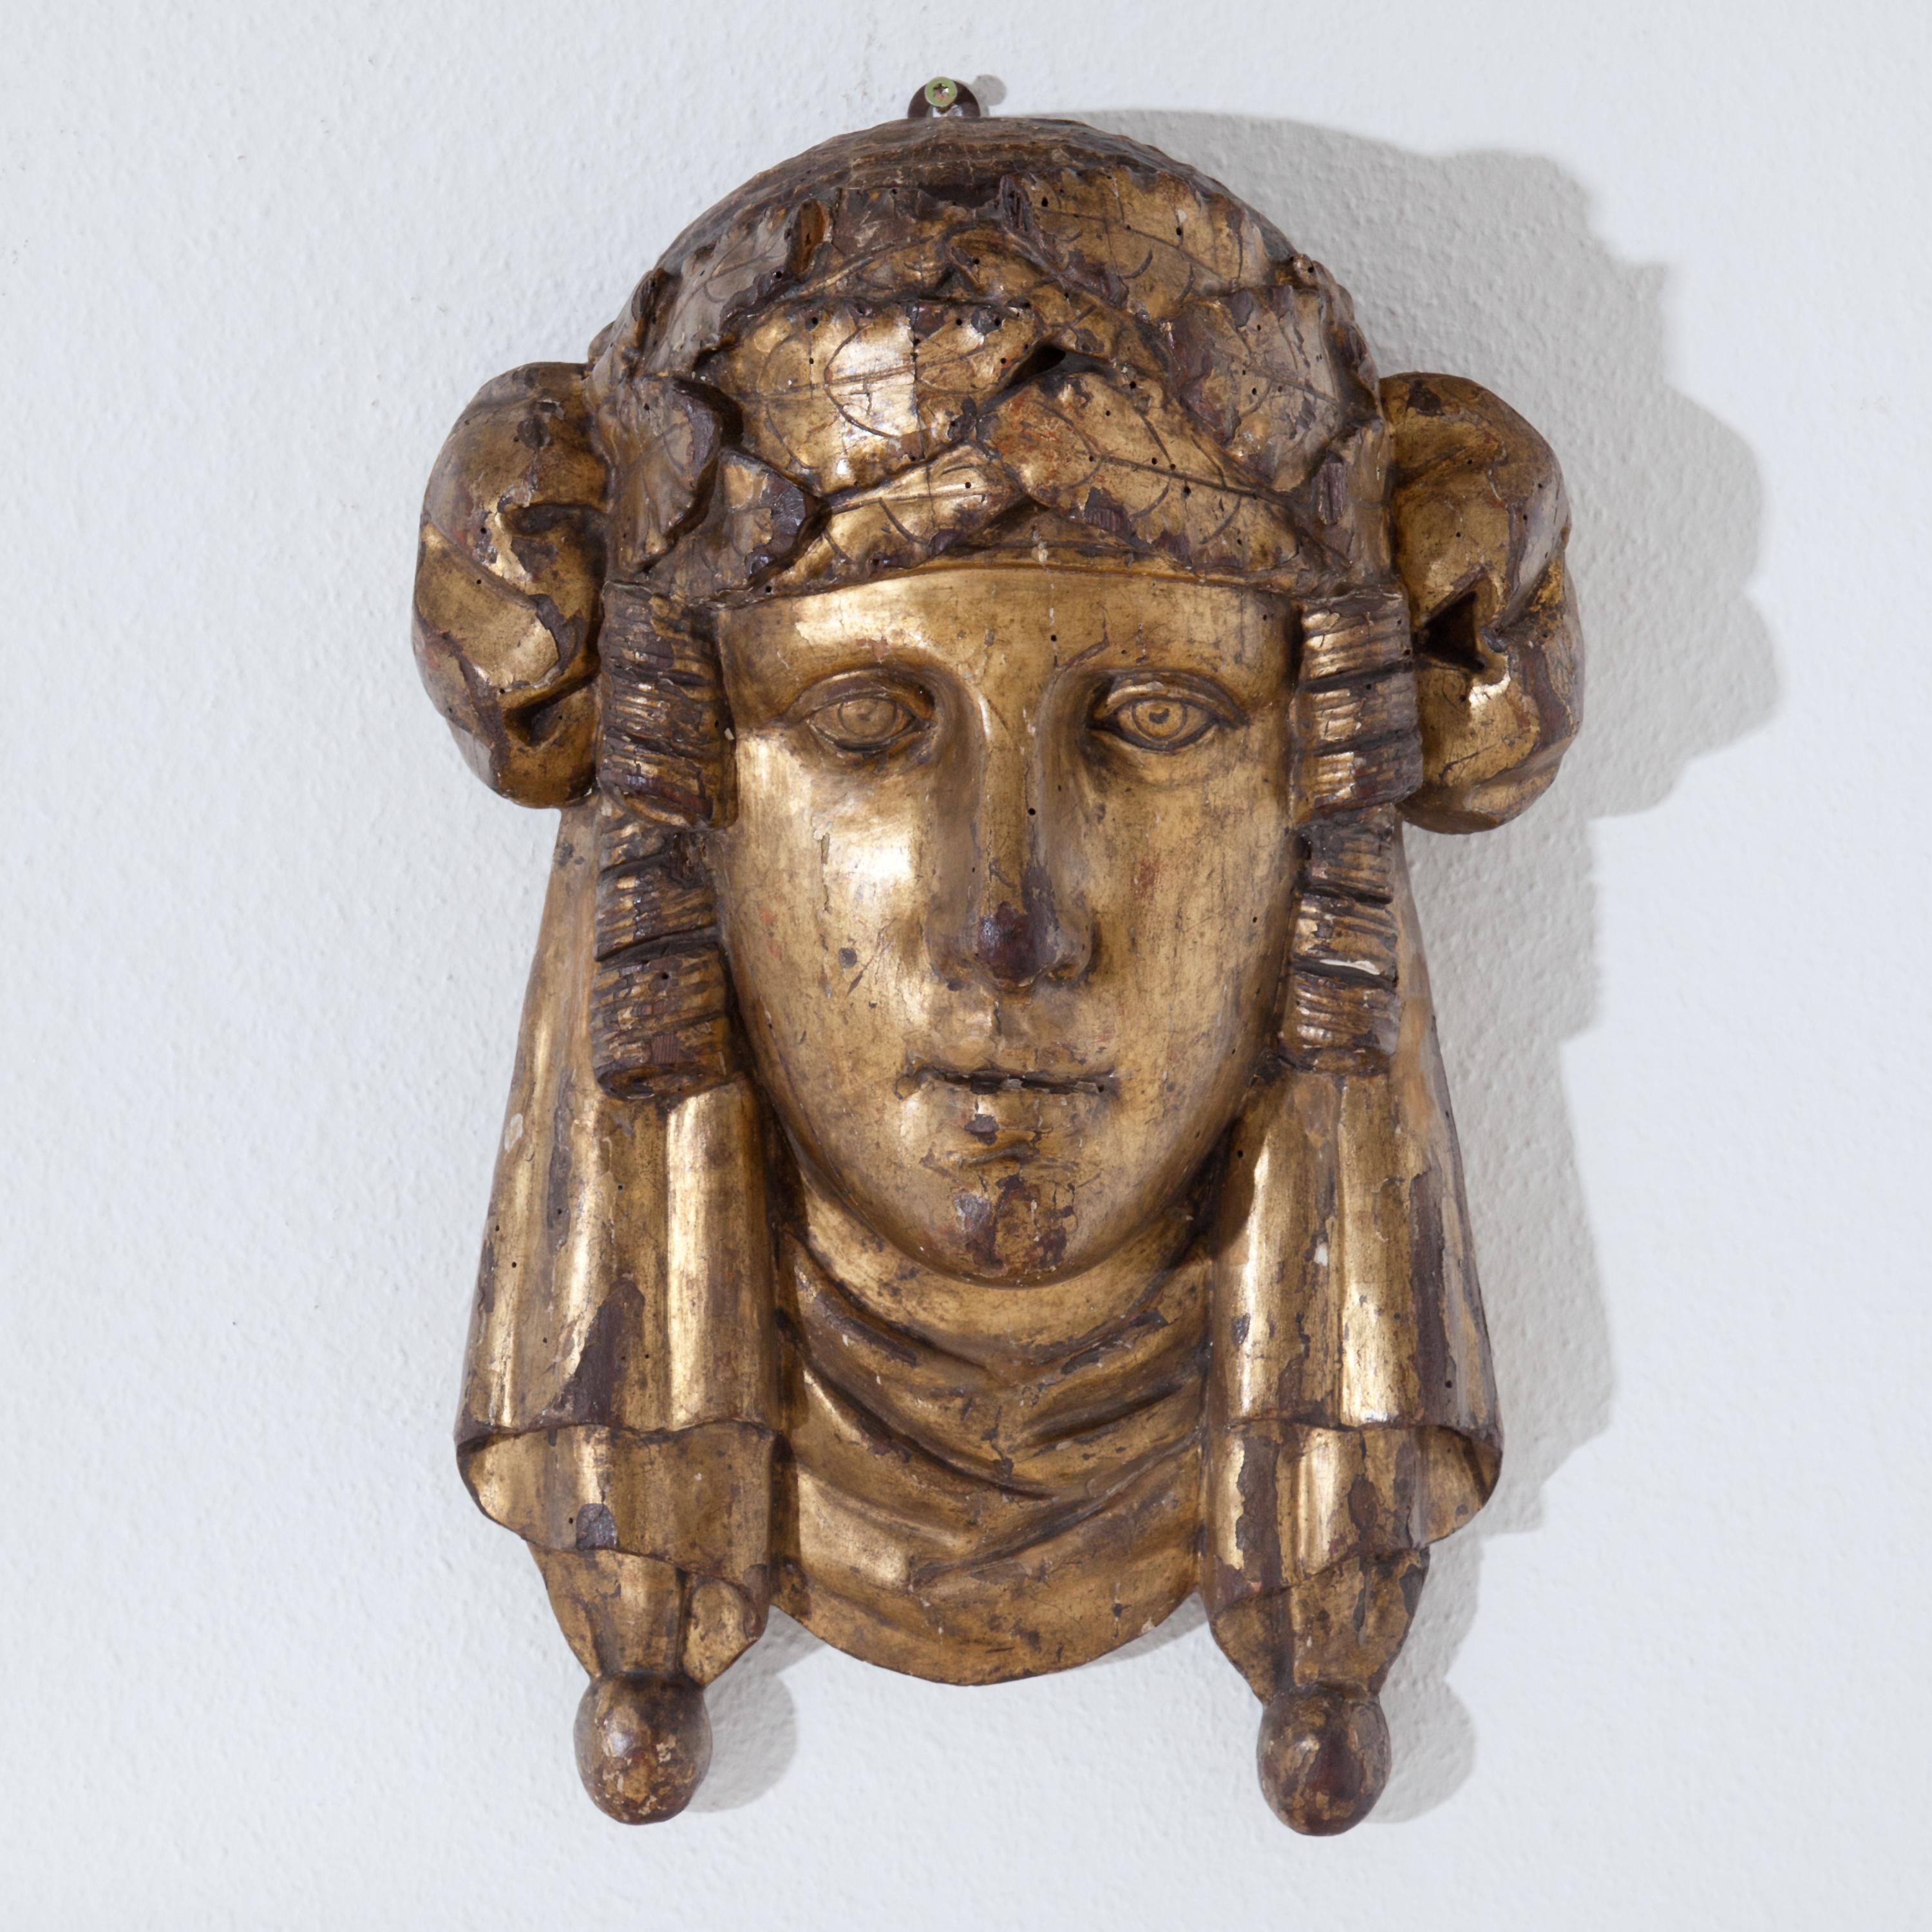 Mascaron of a young lady with Art Nouveau head-dress, carved in wood and gilded.